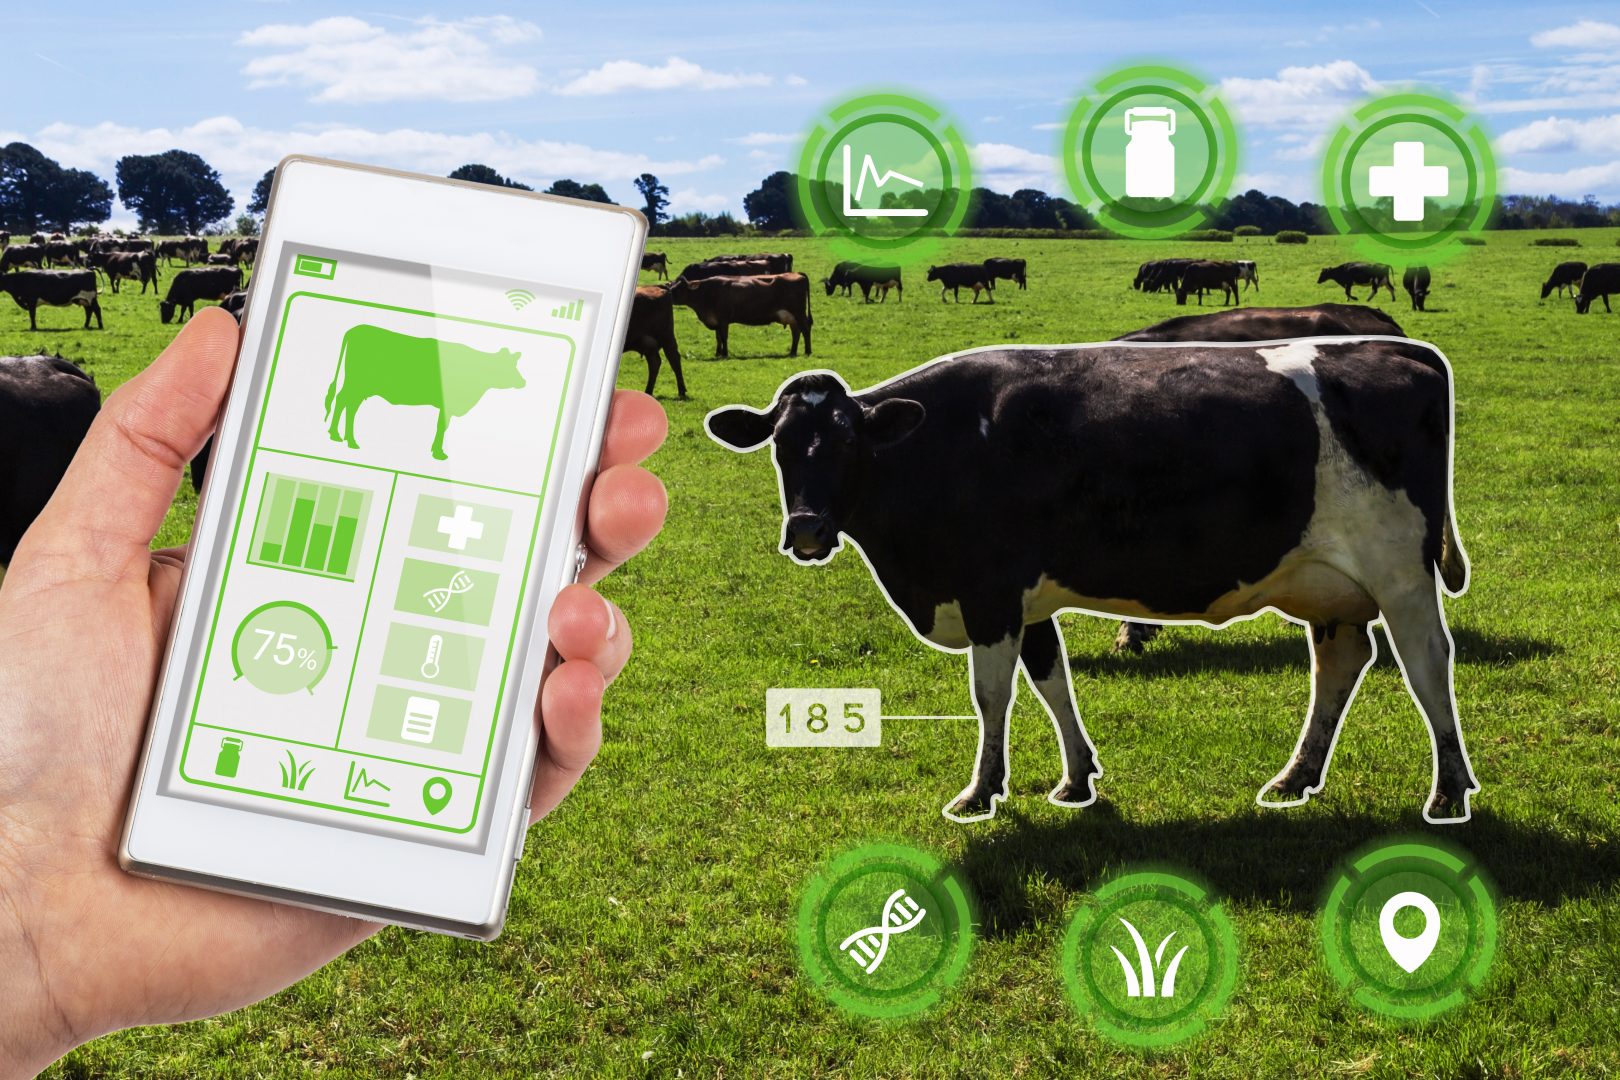 modern farmer using TeamViewer IoT in agriculture in smart farm to monitor dairy cows